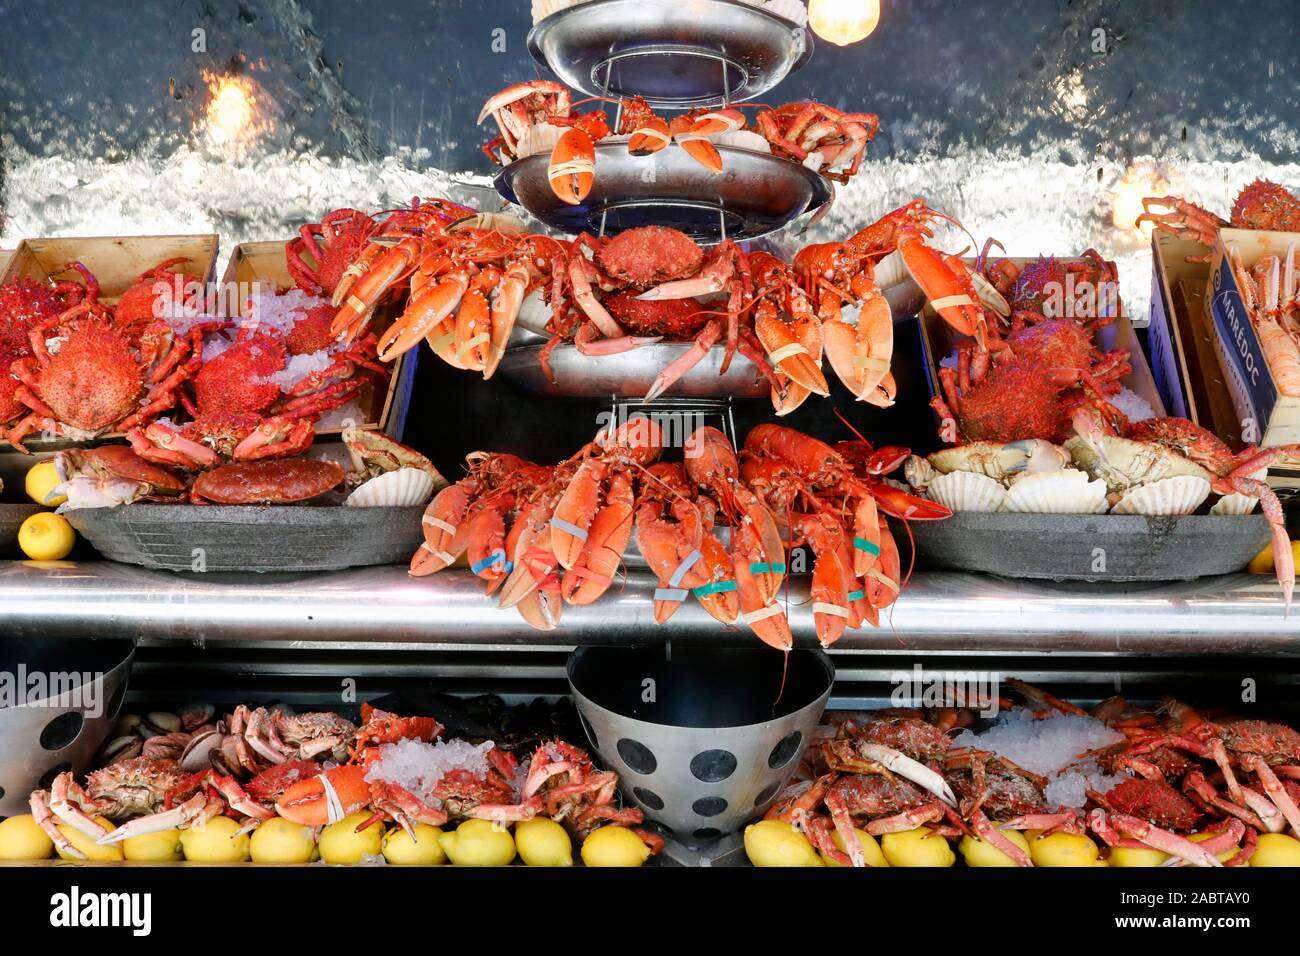 Sea food restaurant. Lobsters and crabs. Paris. France. Stock Photo